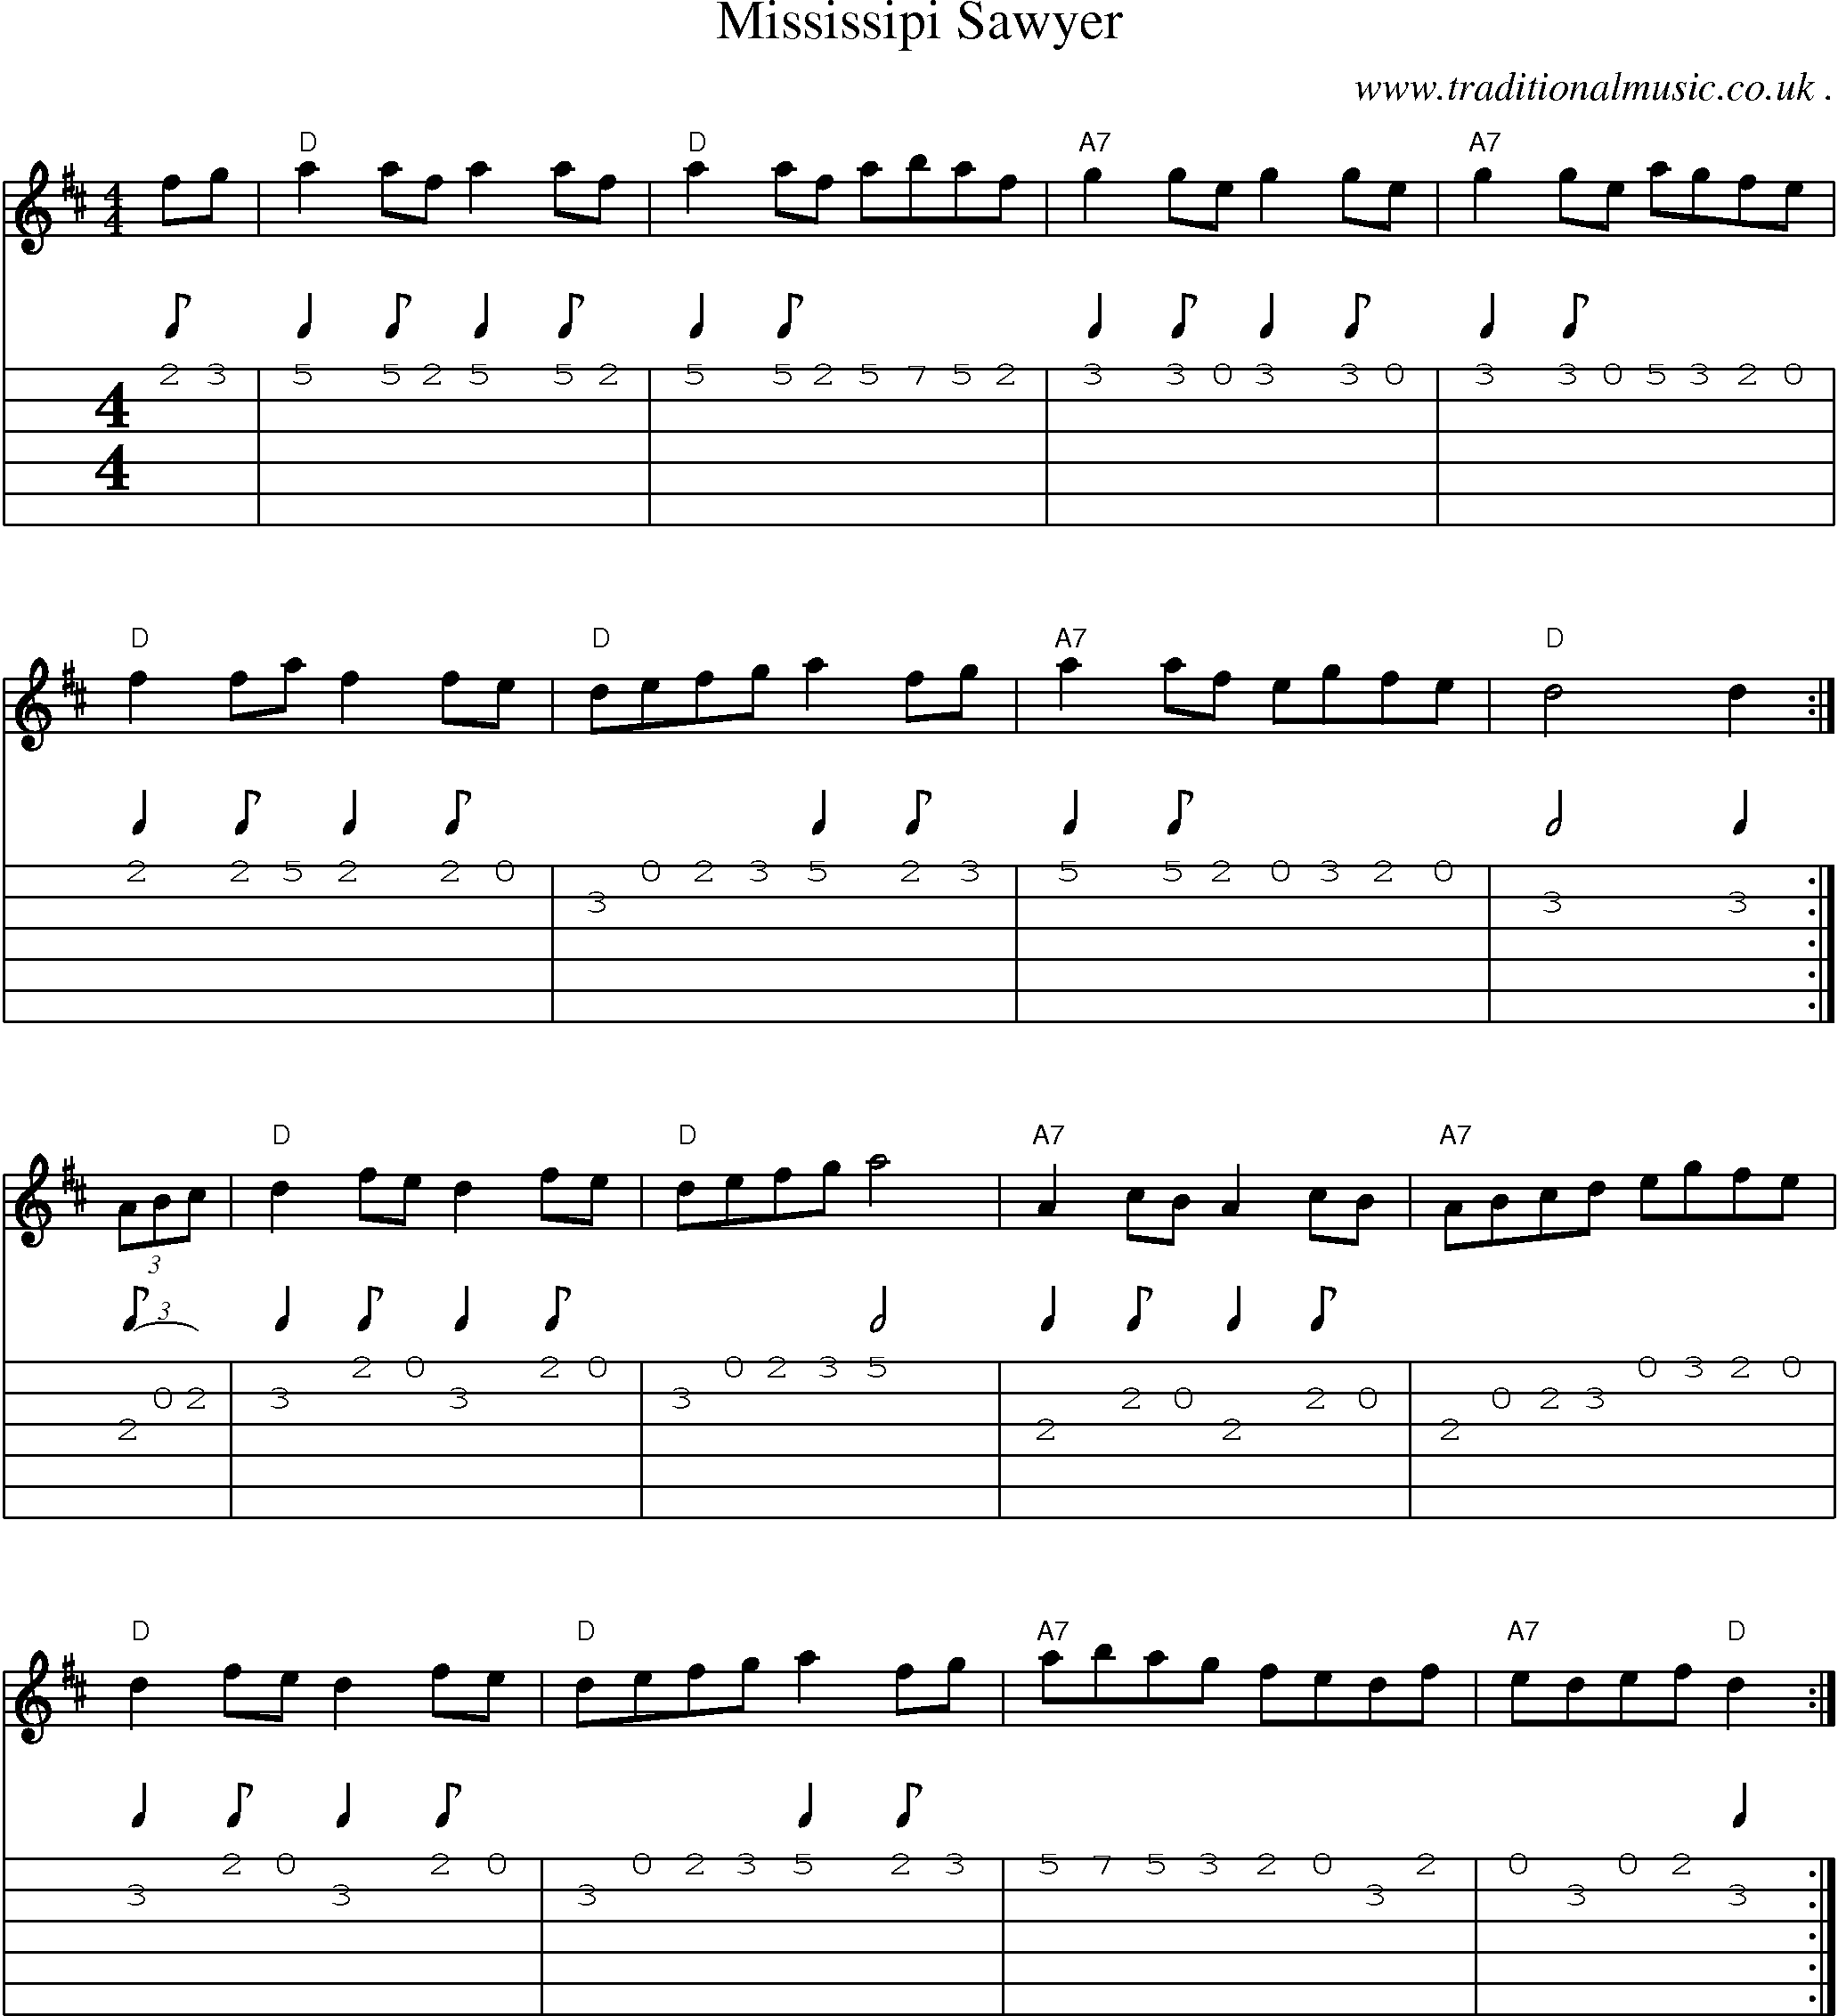 Sheet-Music and Guitar Tabs for Mississipi Sawyer